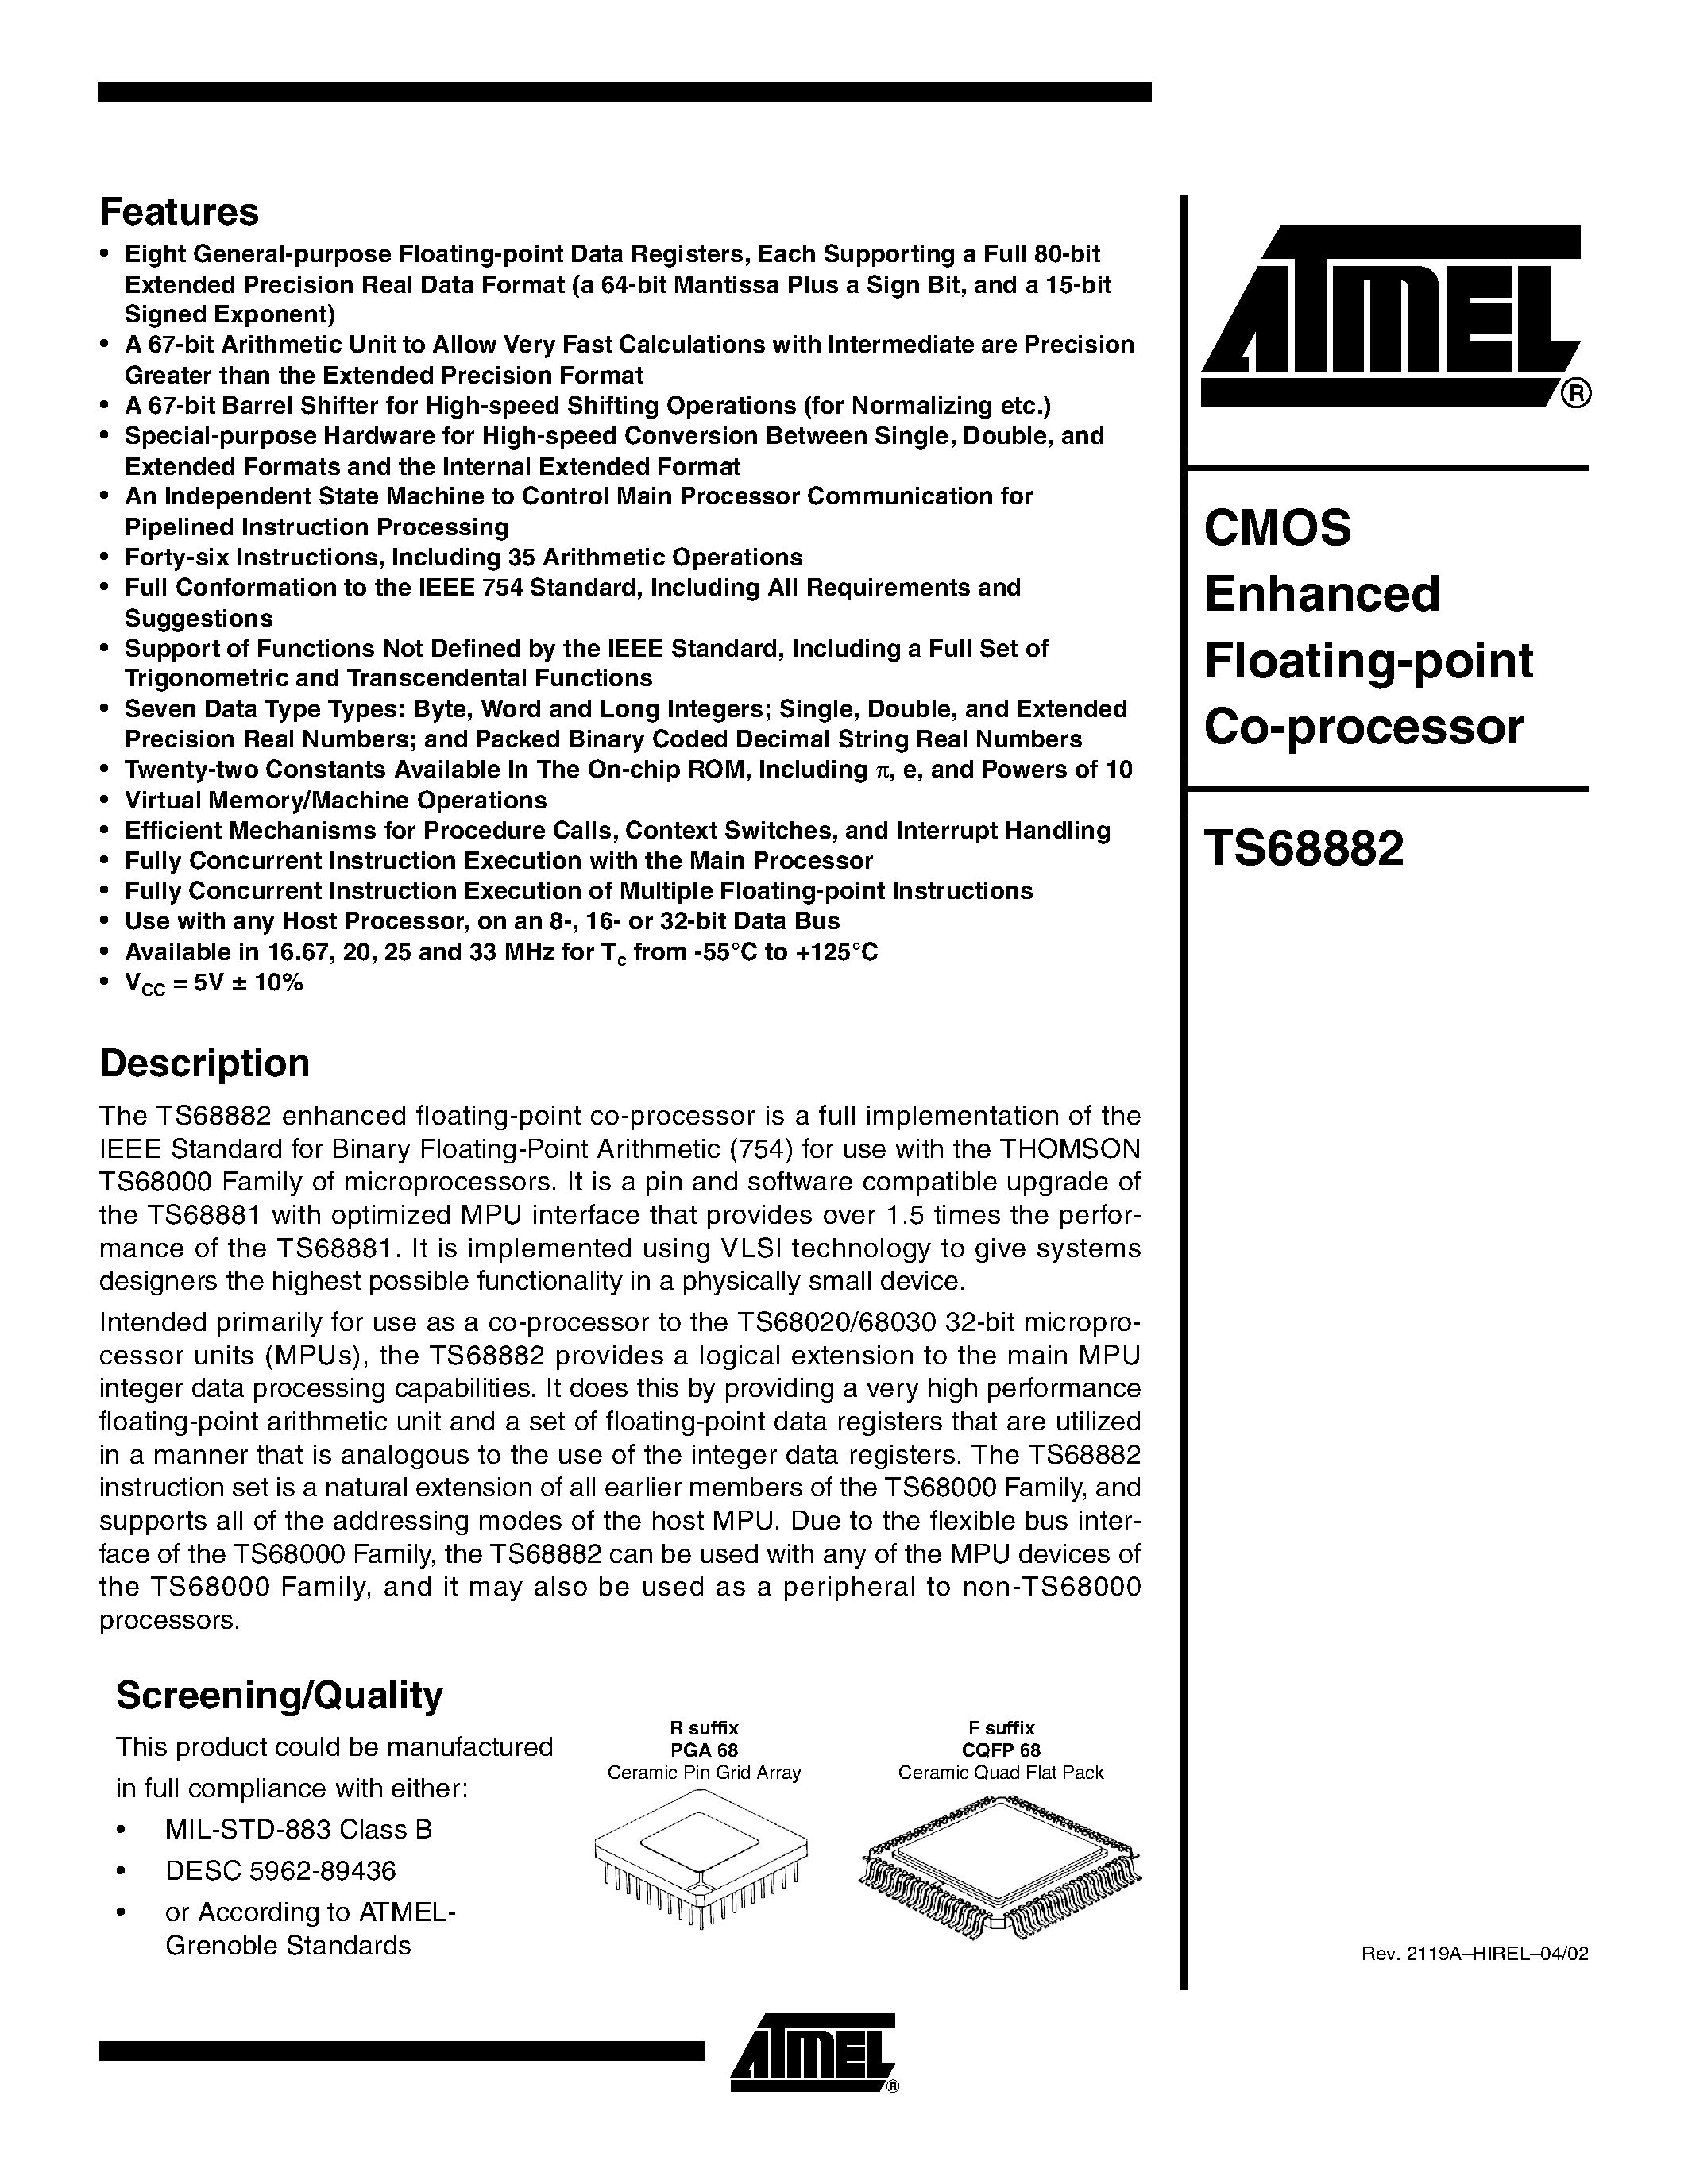 Datasheet TS68882VF20 - CMOS Enhanced Floating-point Co-processor page 1